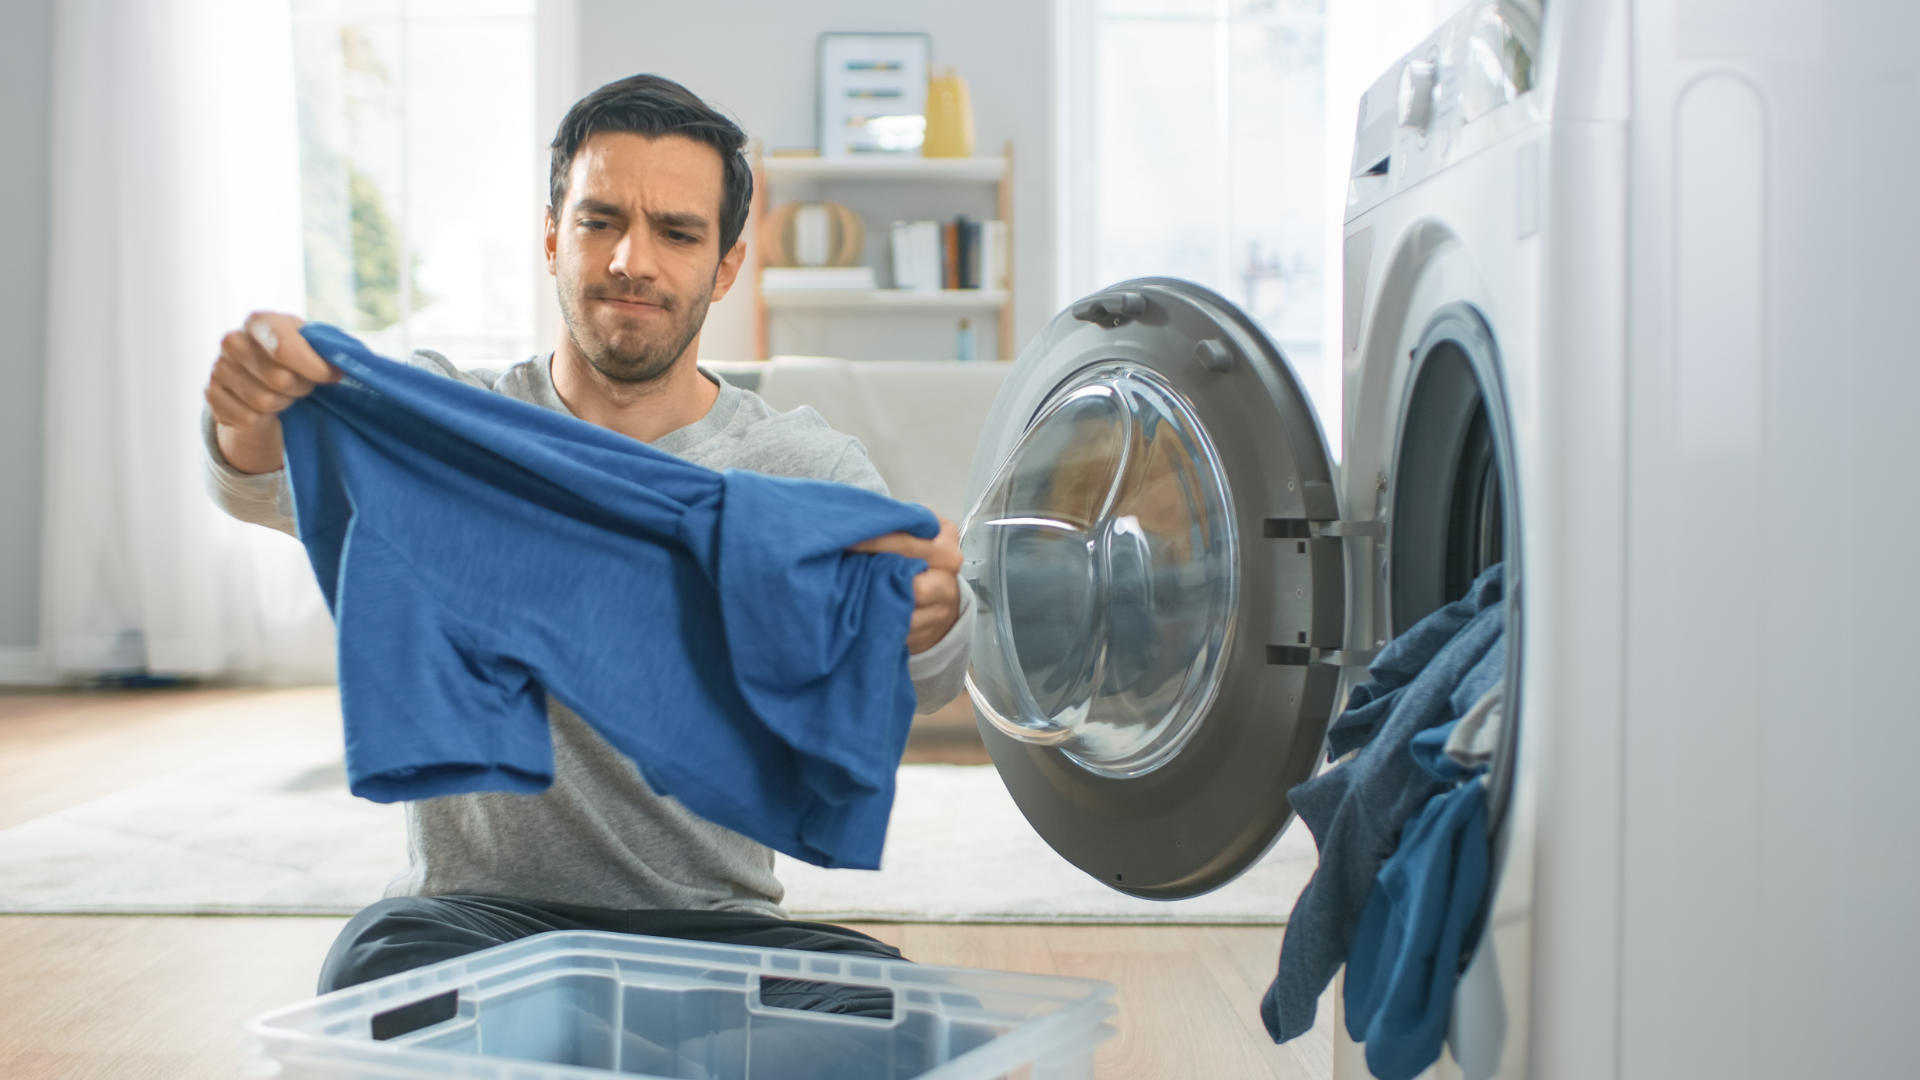 How To Get Mildew Out Of Clothes In The Washing Machine